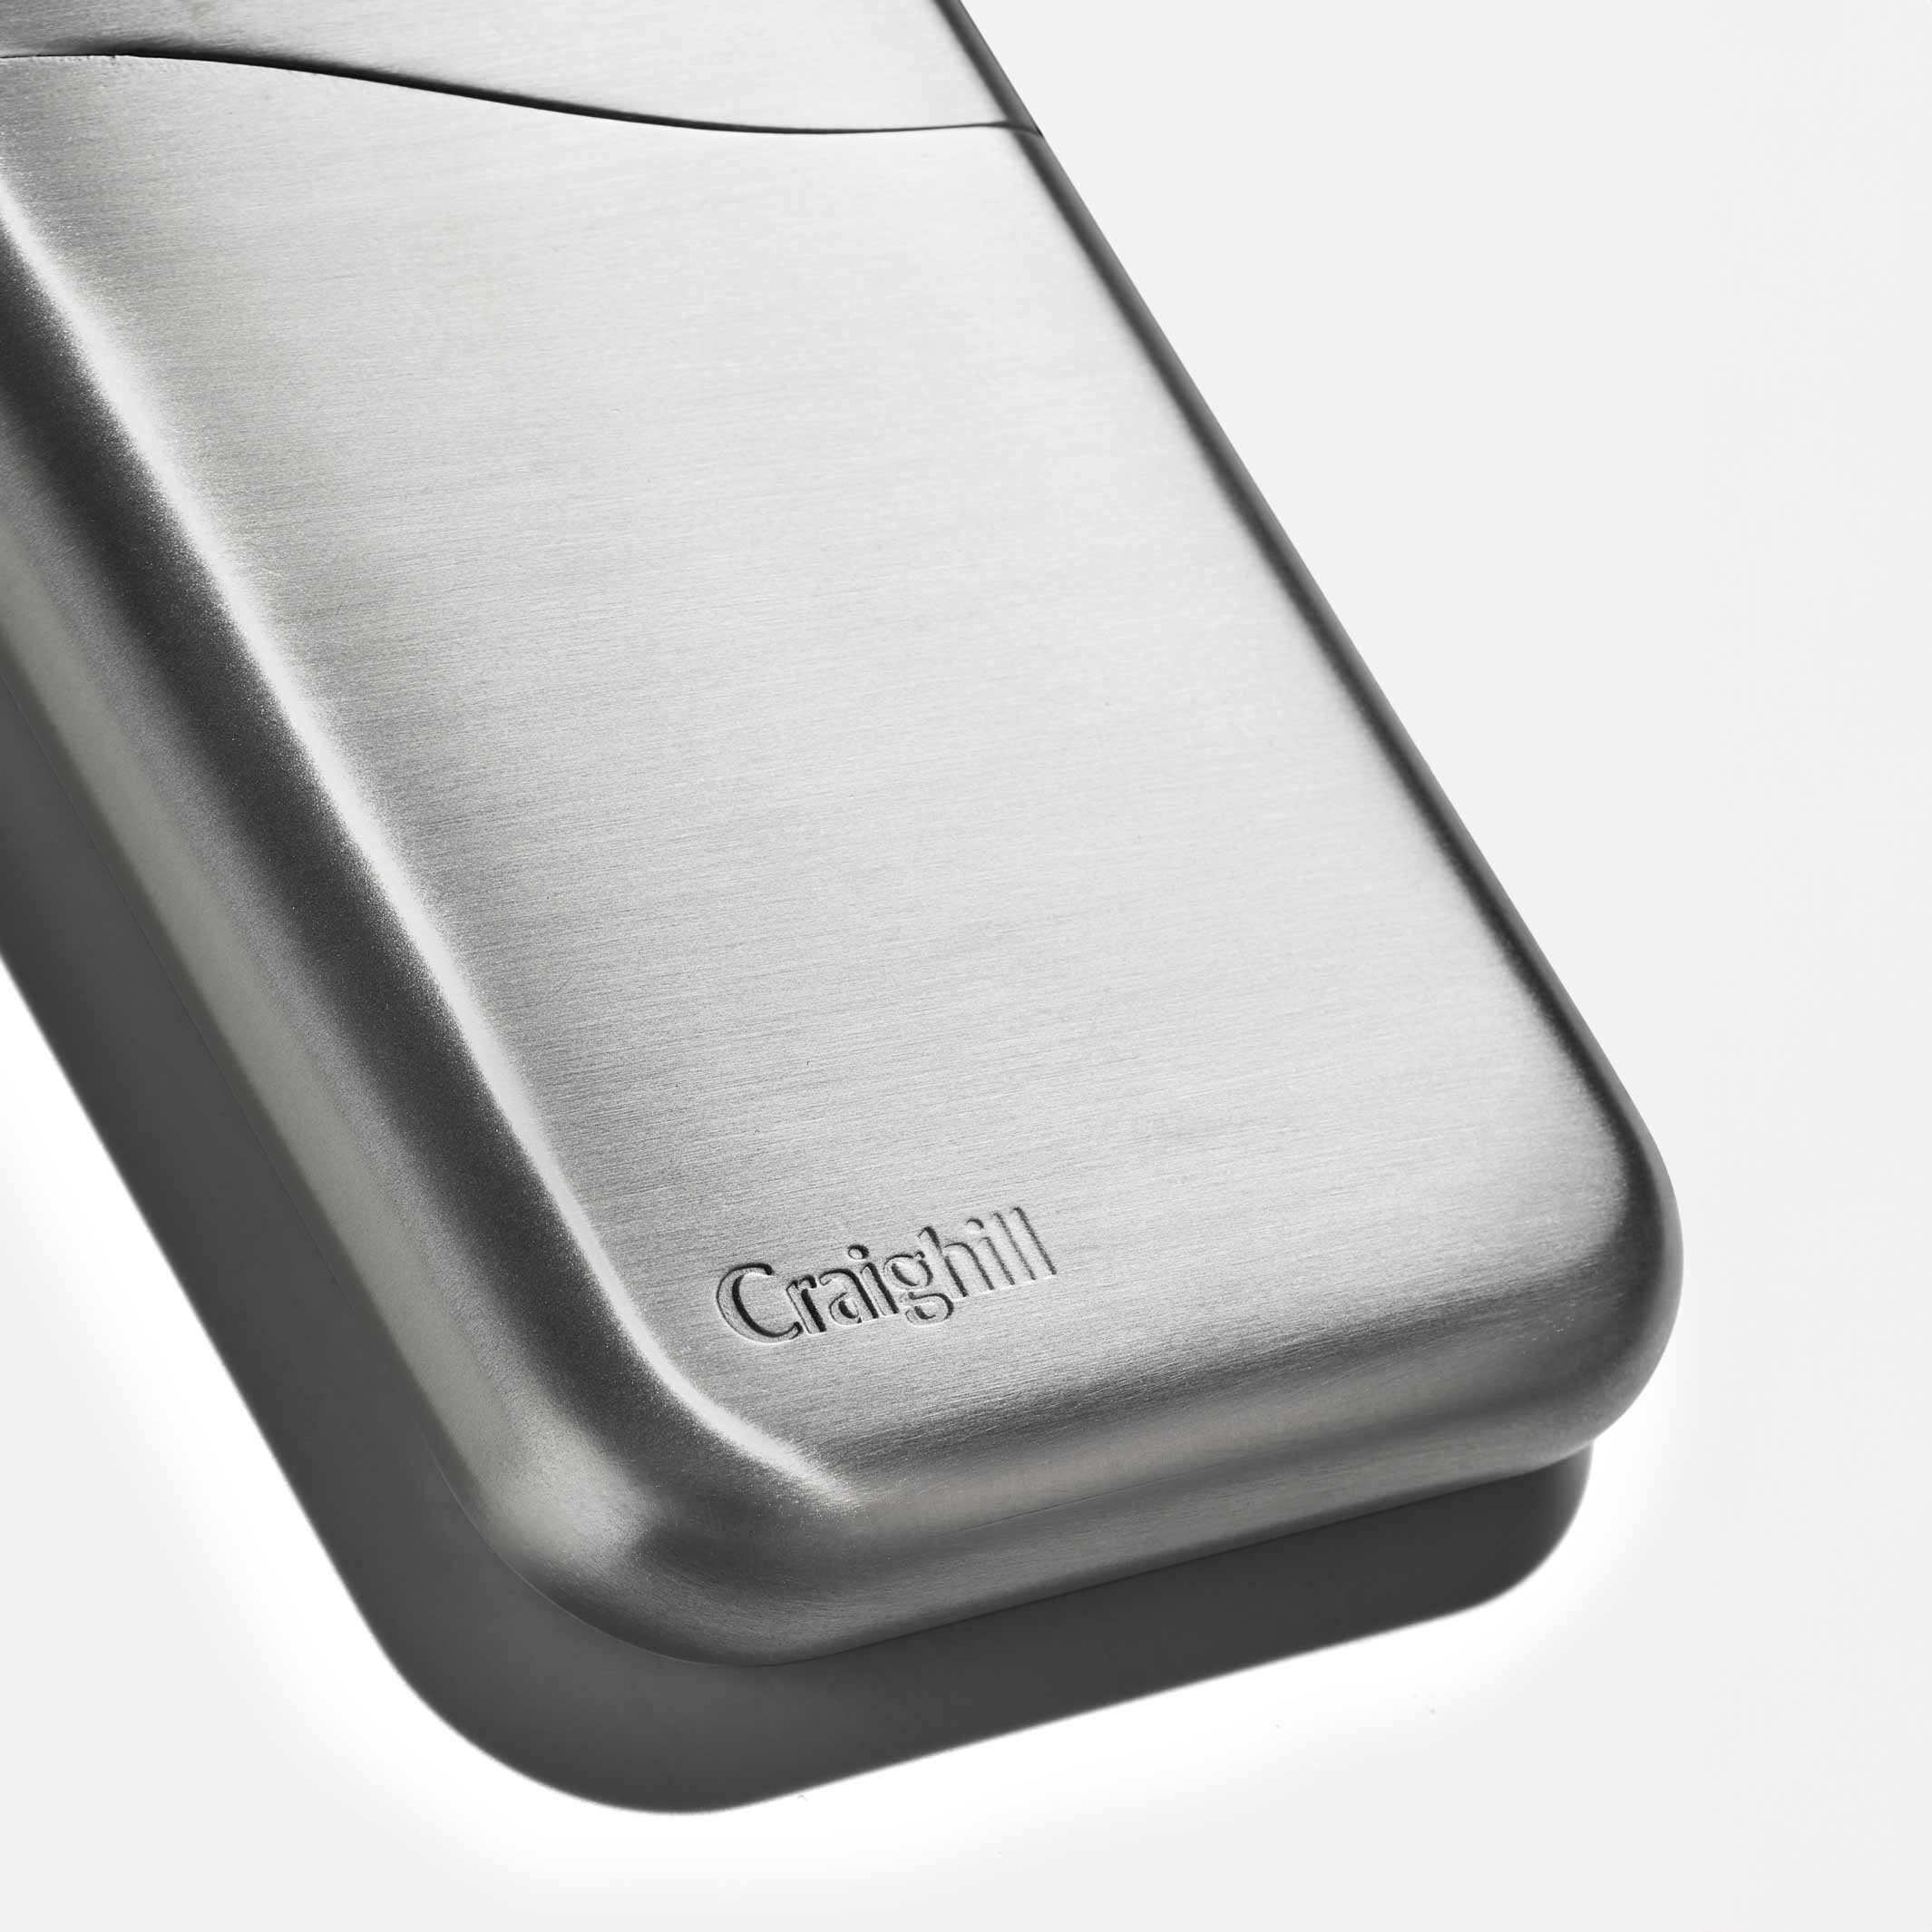 SUMMIT | CARD CASE | Silver Stainless Steel | Craighill